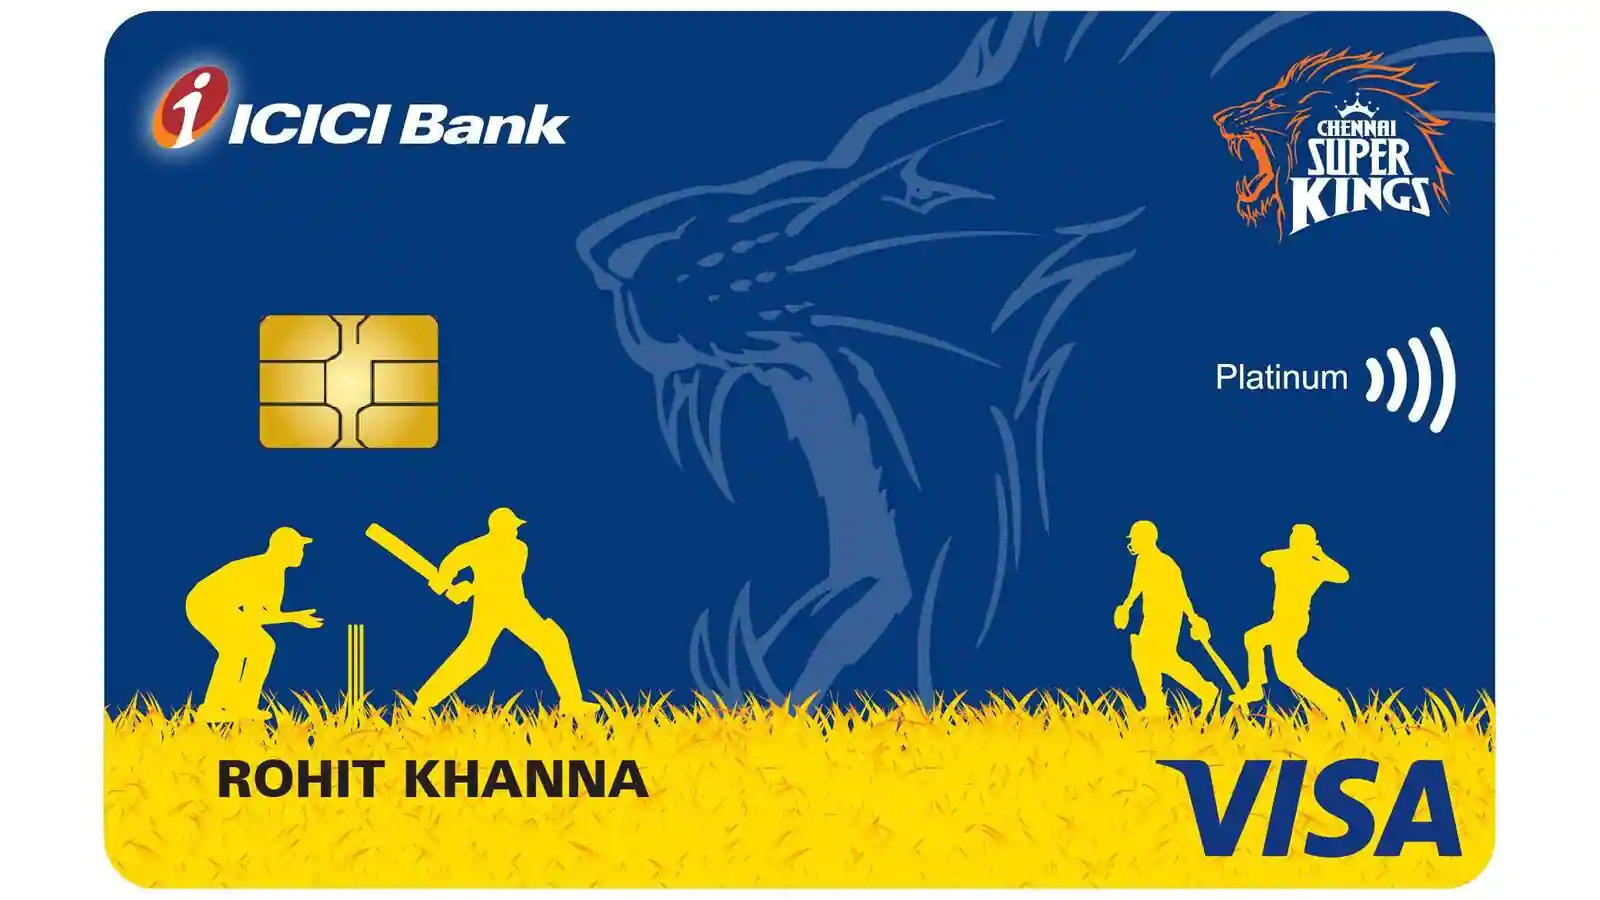 Chennai Super Kings and ICICI Bank partners for co-branded credit card